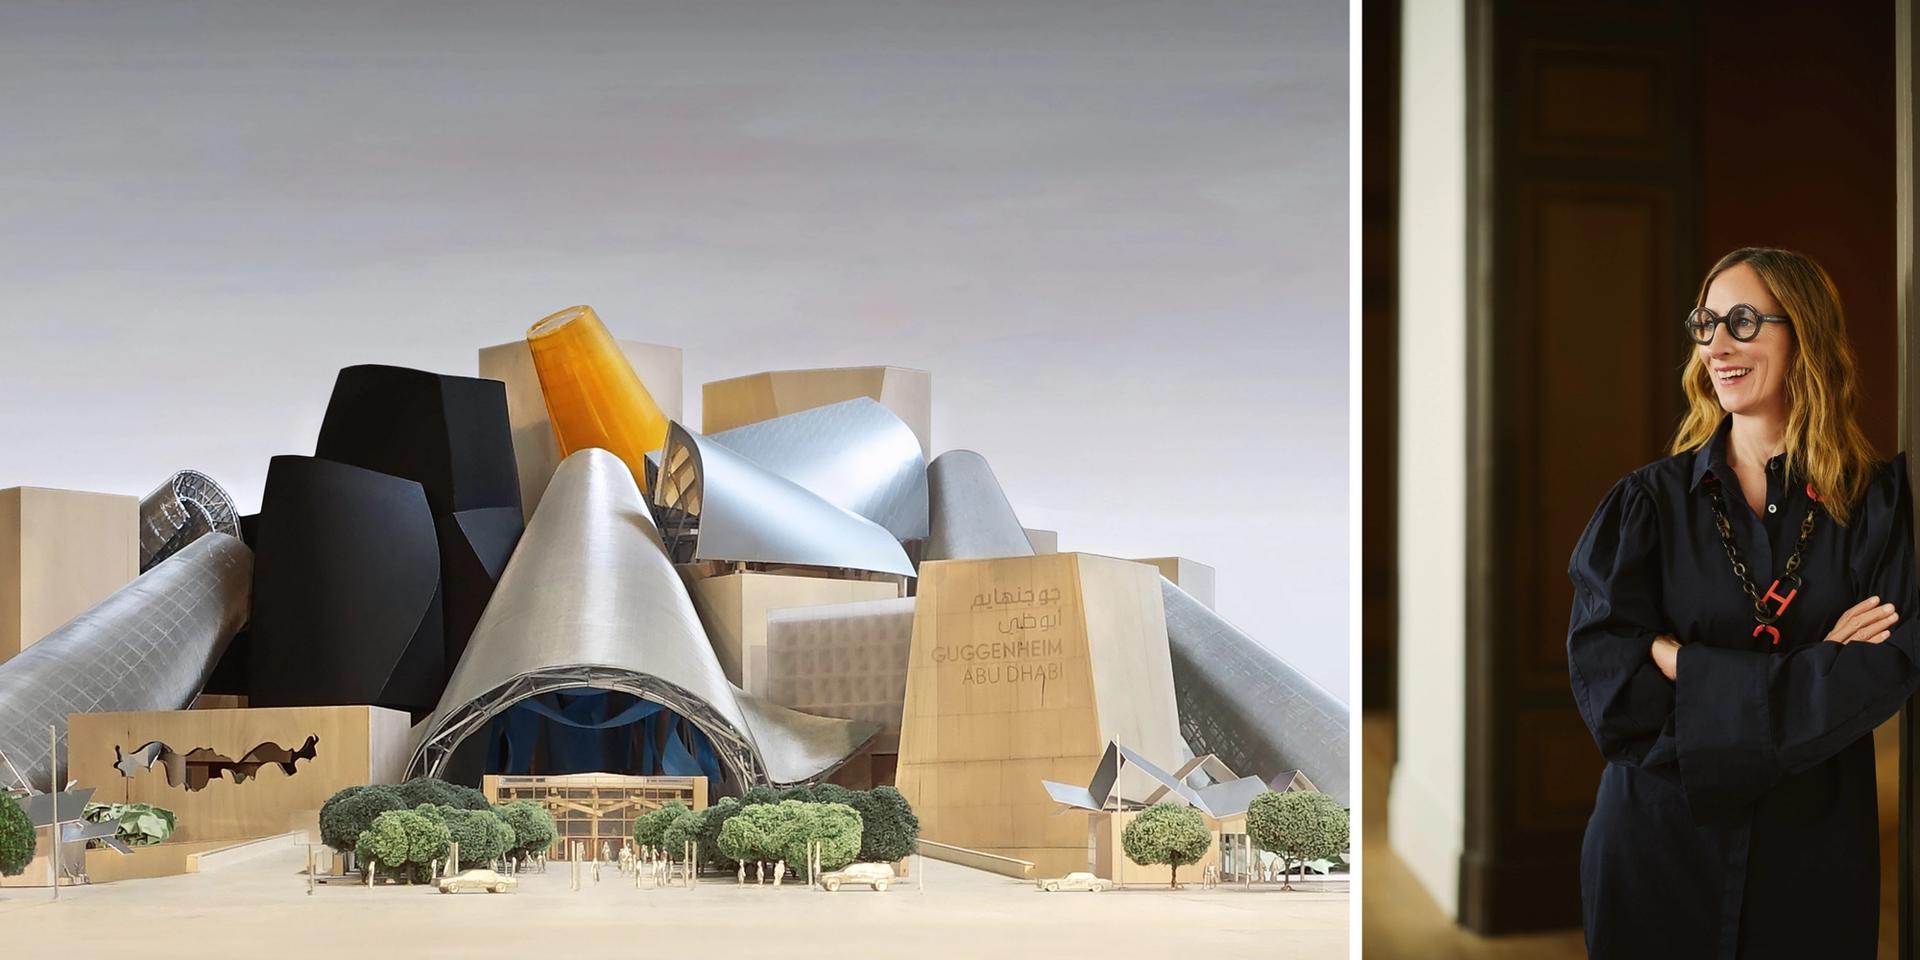 Stephanie Rosenthal (right) will oversee the final stages of the construction of the Guggenheim Abu Dhabi (left) Images courtesy of Solomon R. Guggenheim Foundation; TDIC and Gehry Partners, LLP